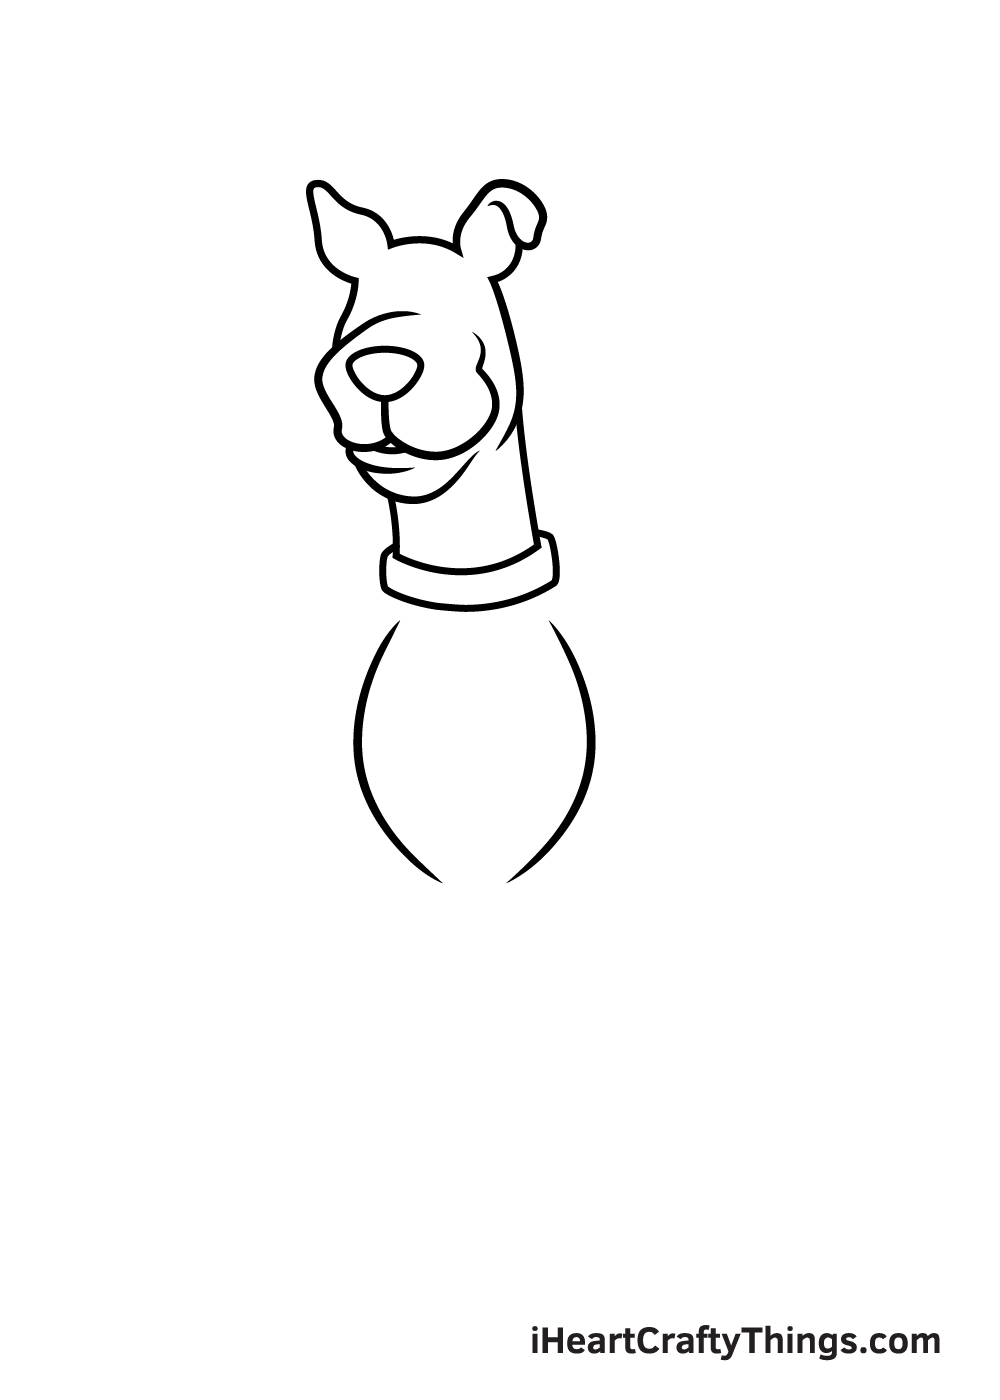 drawing Scooby-Doo step 5